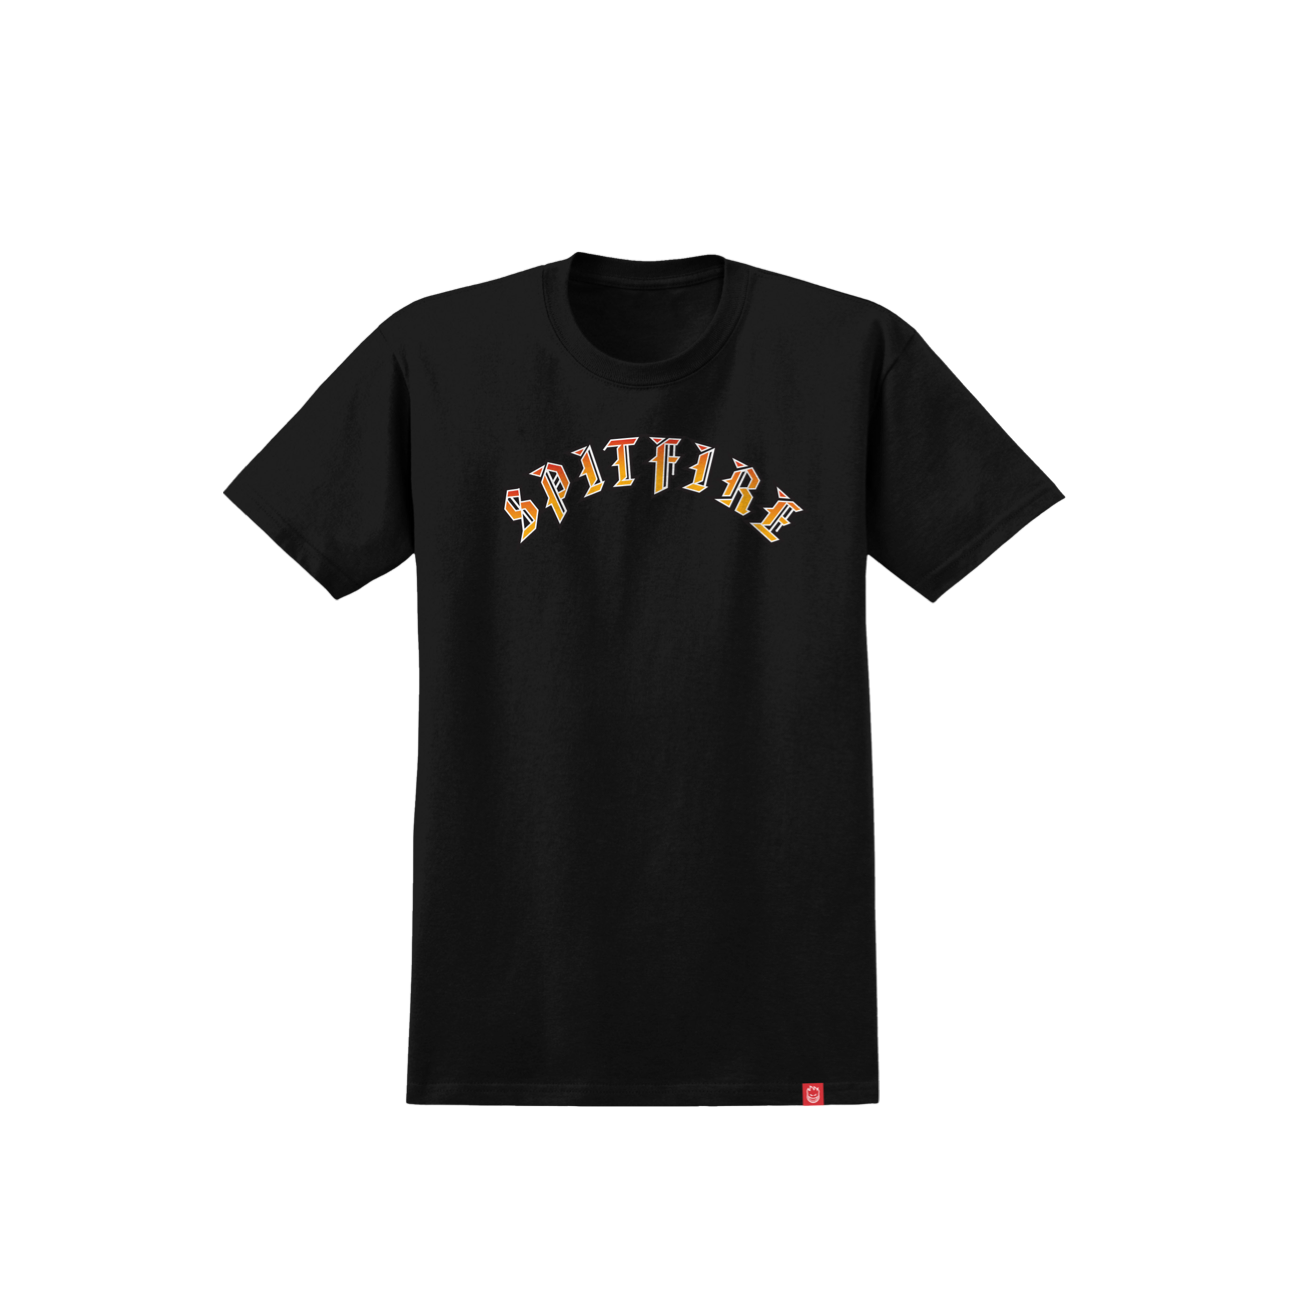 SPITFIRE - OLD E YOUTH TEE - BLACK